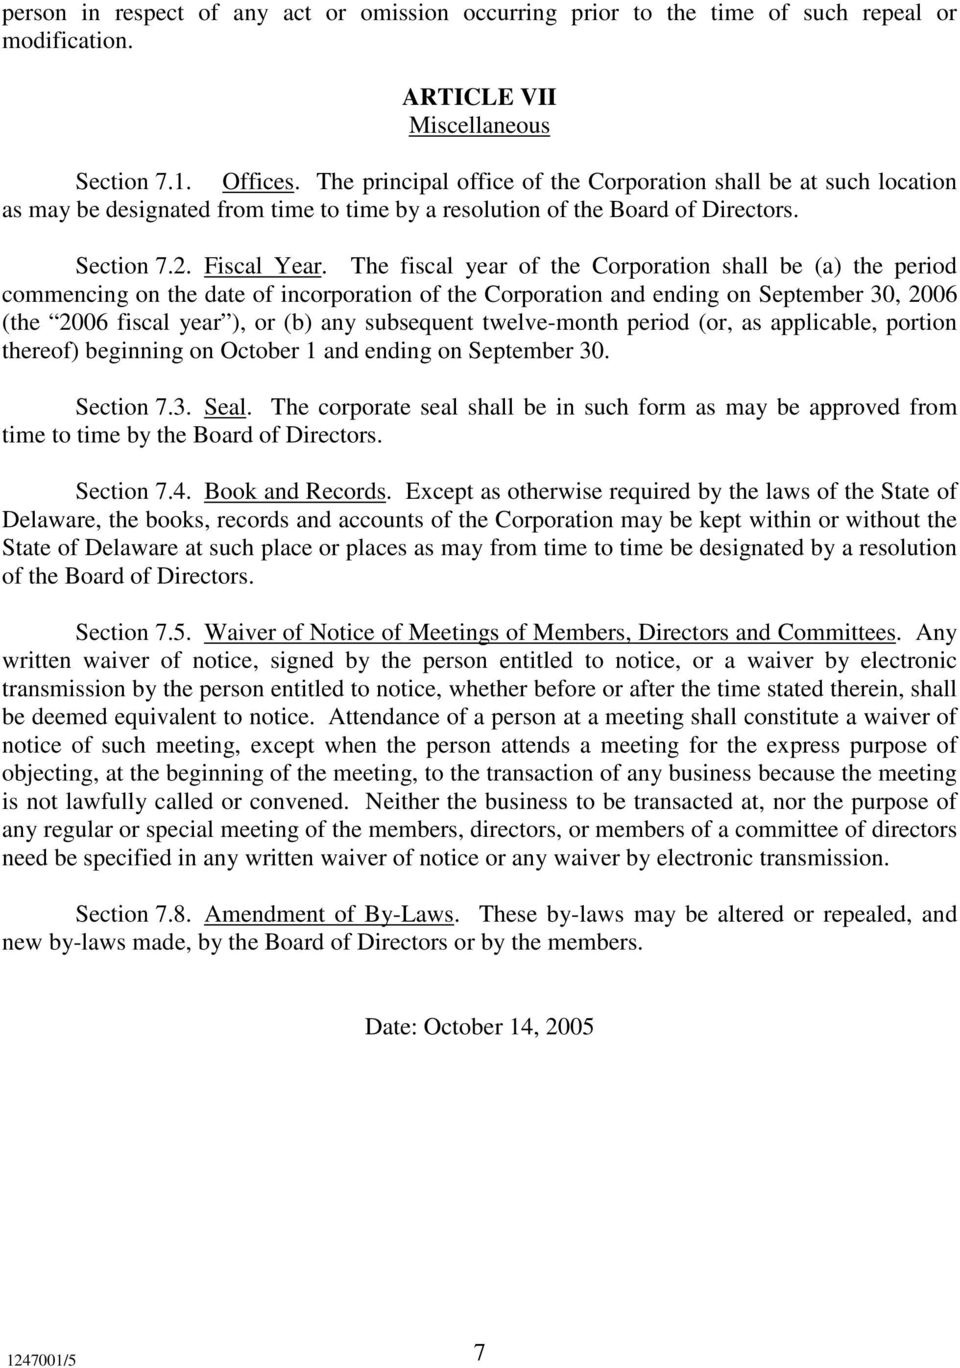 The fiscal year of the Corporation shall be (a) the period commencing on the date of incorporation of the Corporation and ending on September 30, 2006 (the 2006 fiscal year ), or (b) any subsequent